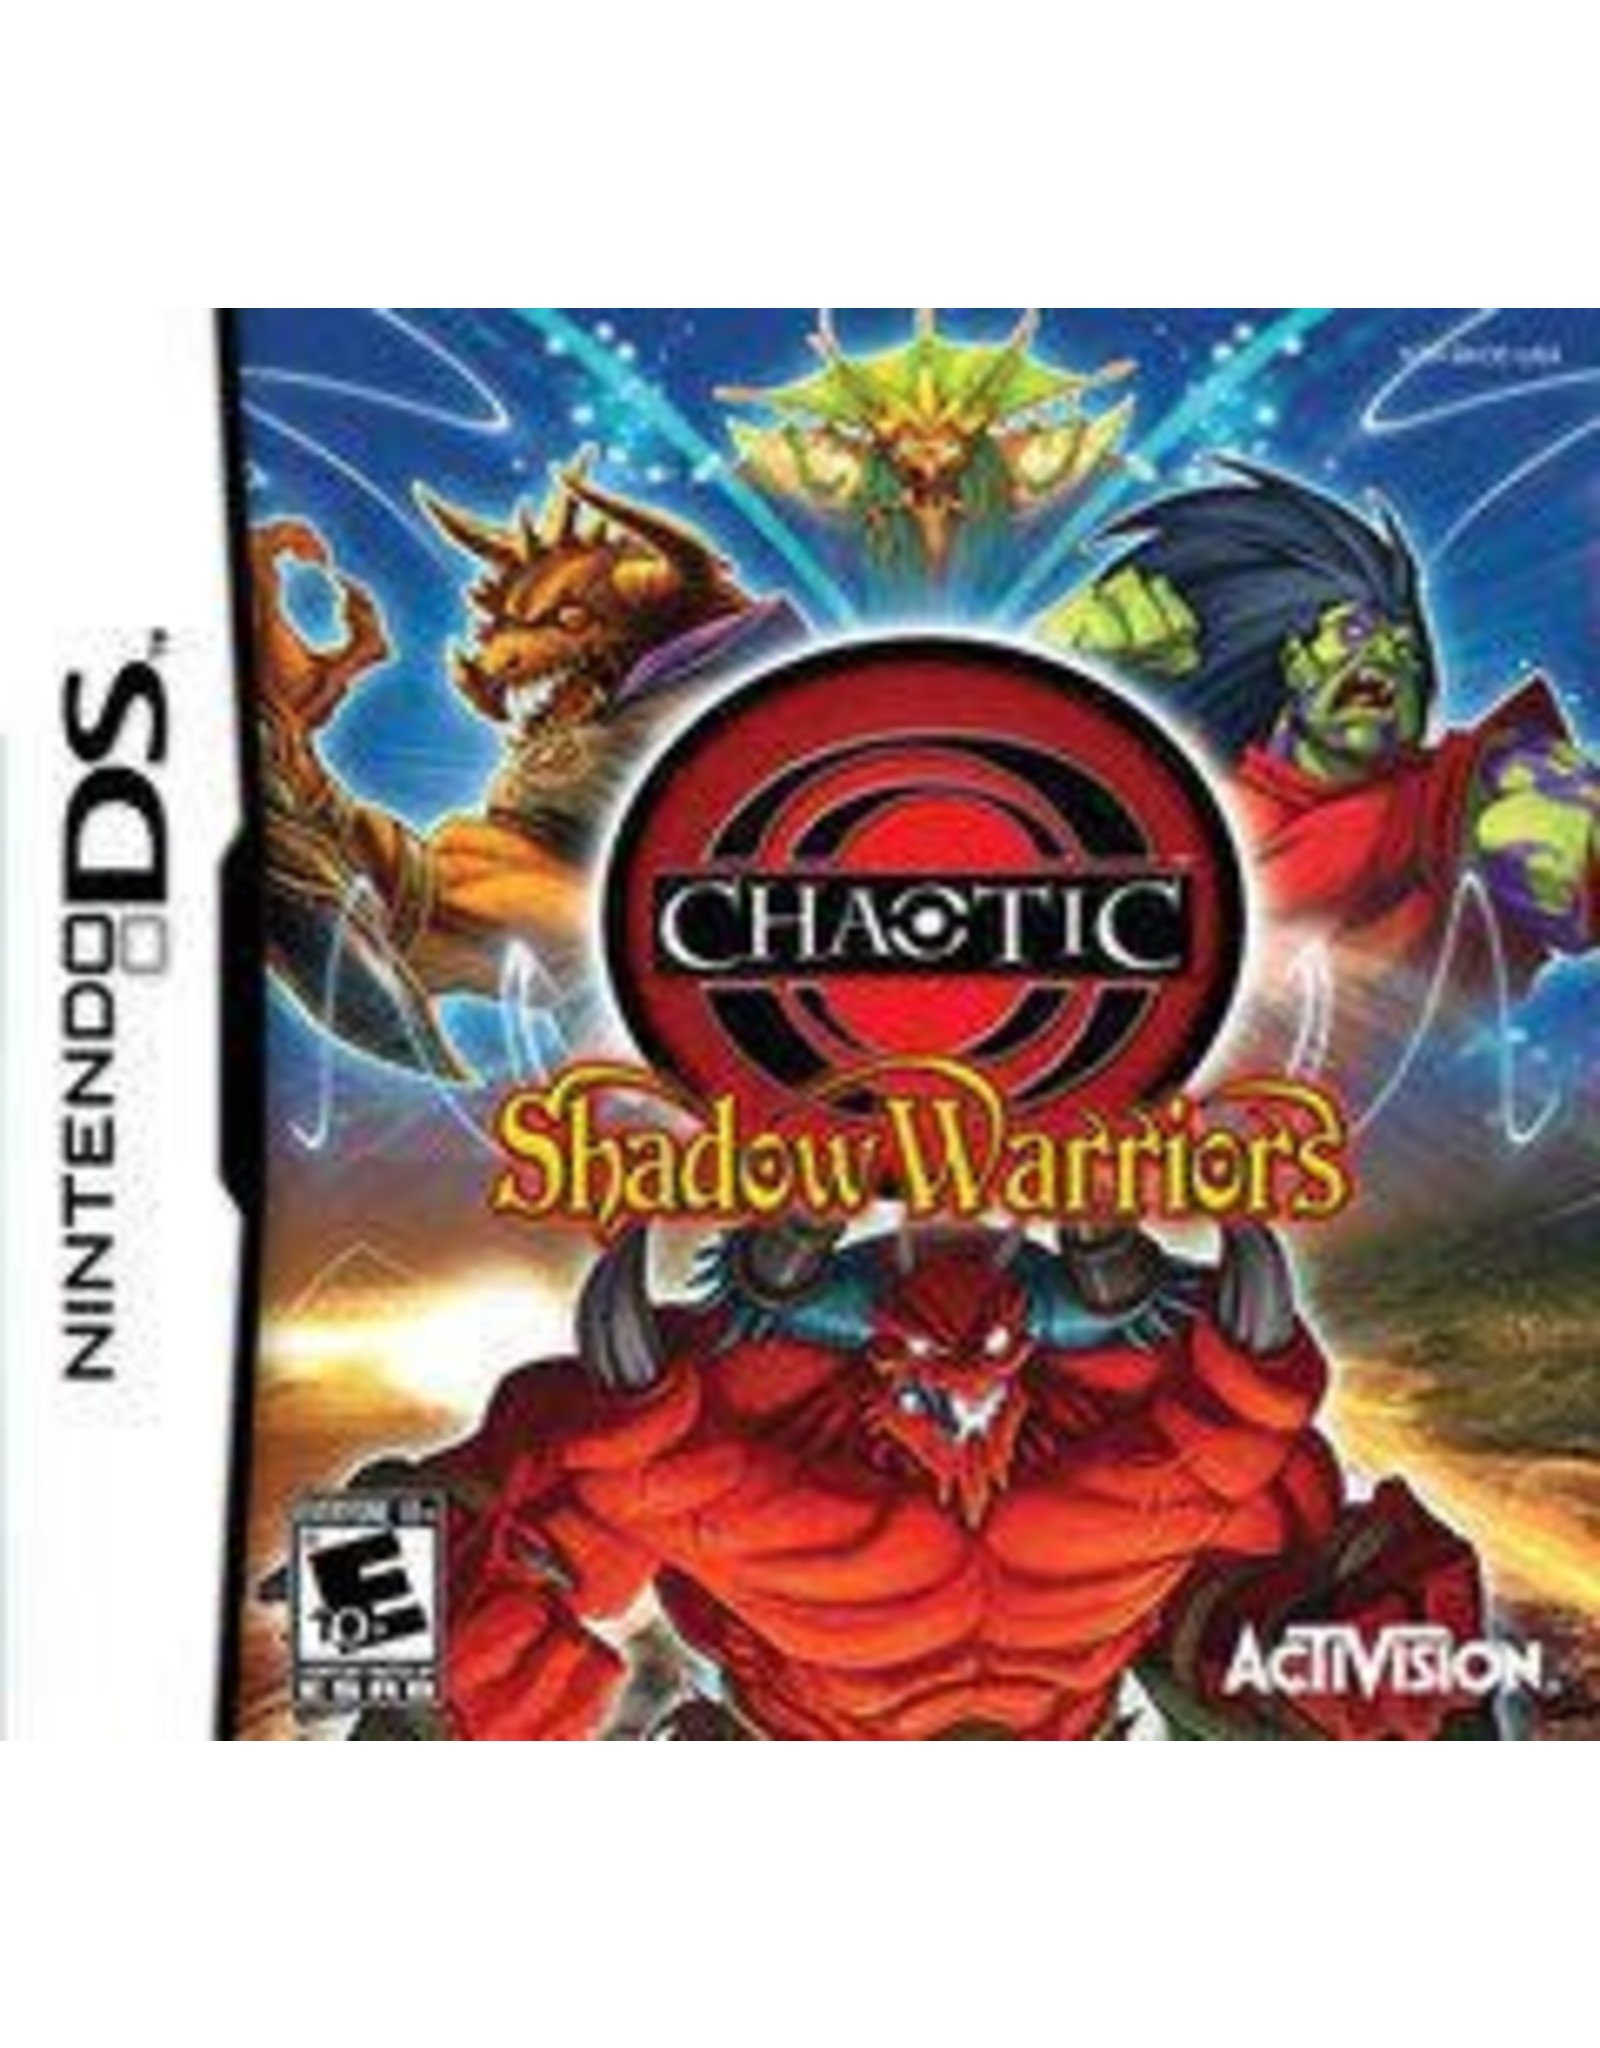 Nintendo DS Chaotic: Shadow Warriors (Cart Only)